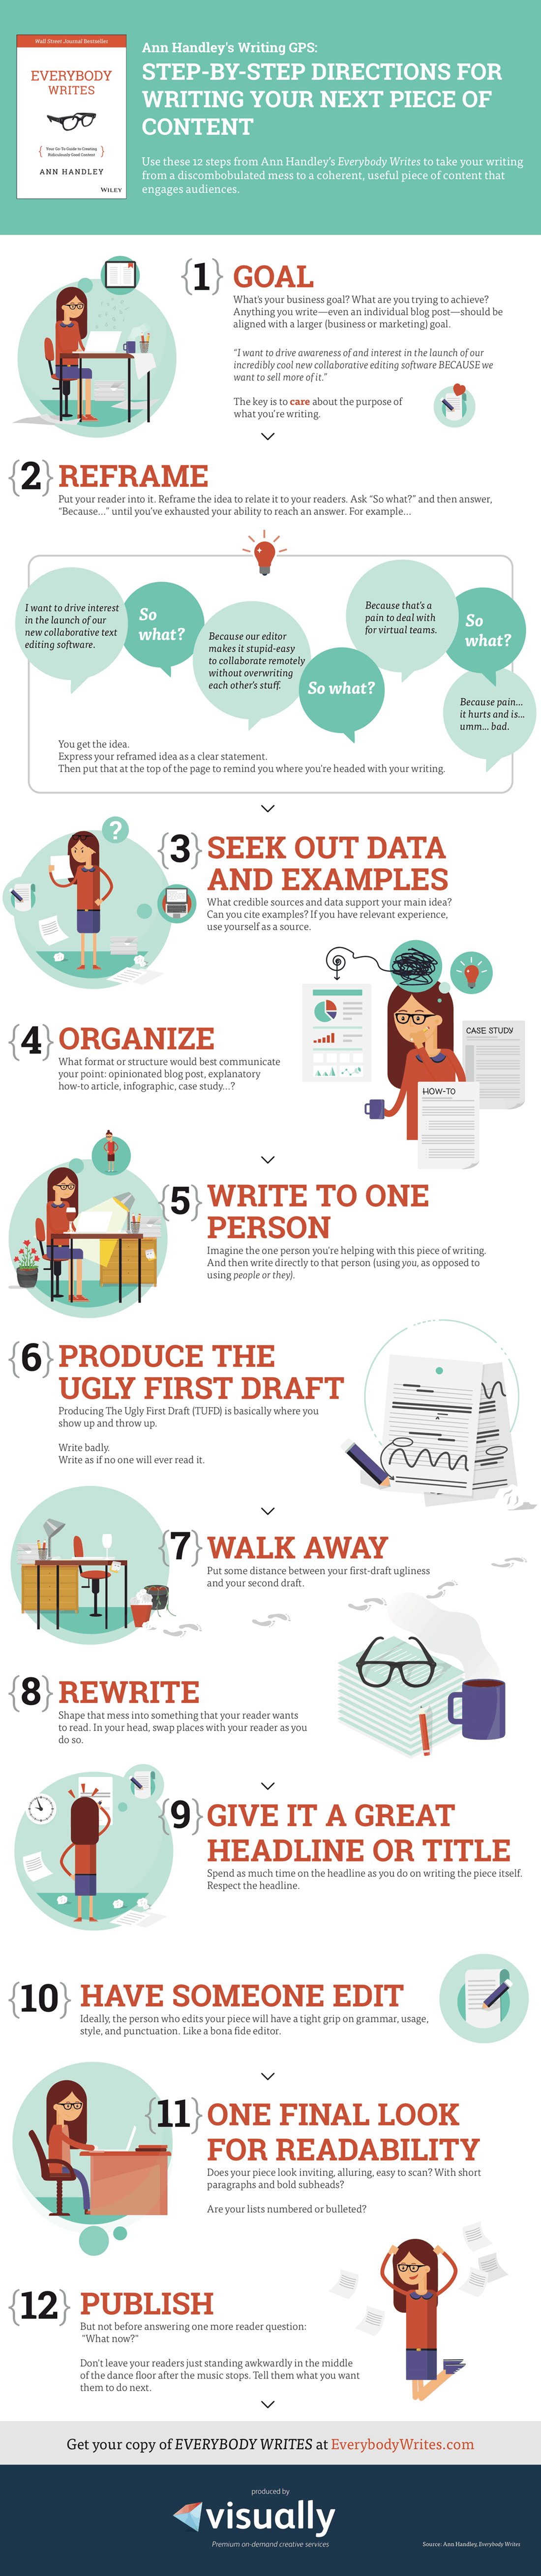 12 Steps to Writing Incredible Content